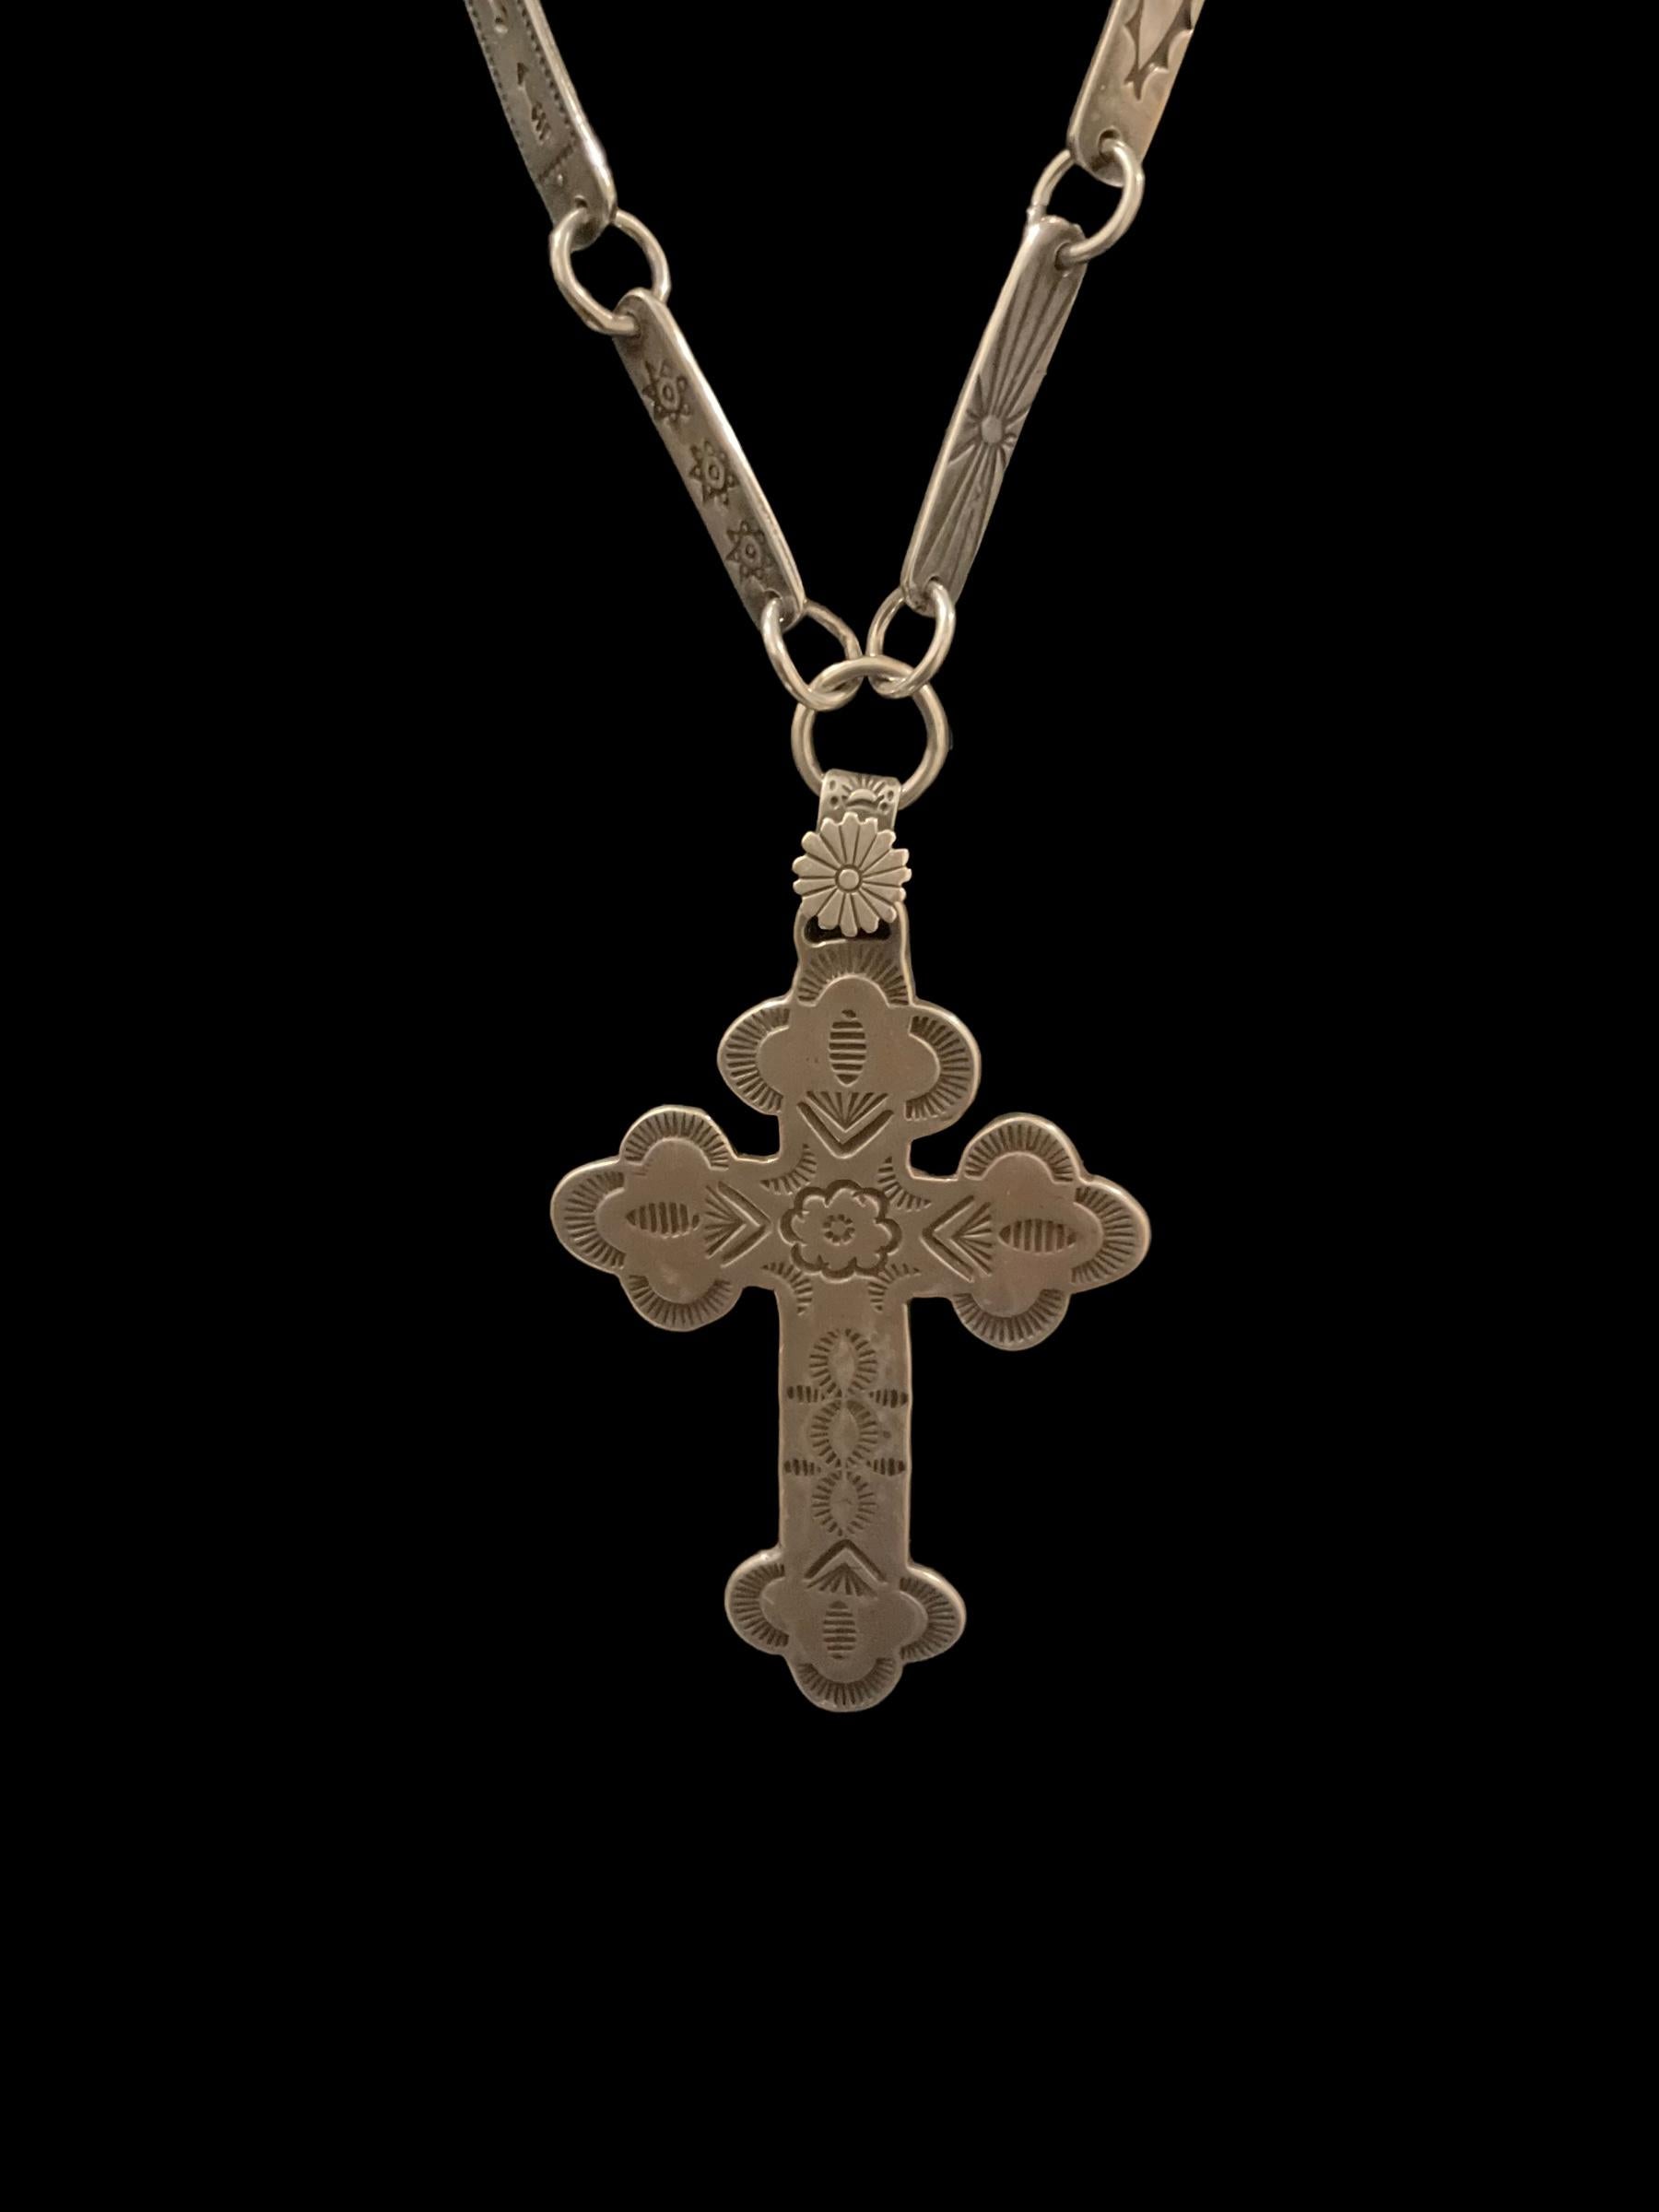 This Fred Harvey Native American sterling silver cross necklace was made circa 1920. Each side of each chain link has a stamped Navajo symbol: sunbursts, snakes, arrows, stars, fish and others. It's quintessential Fred Harvey. I guarantee it'll